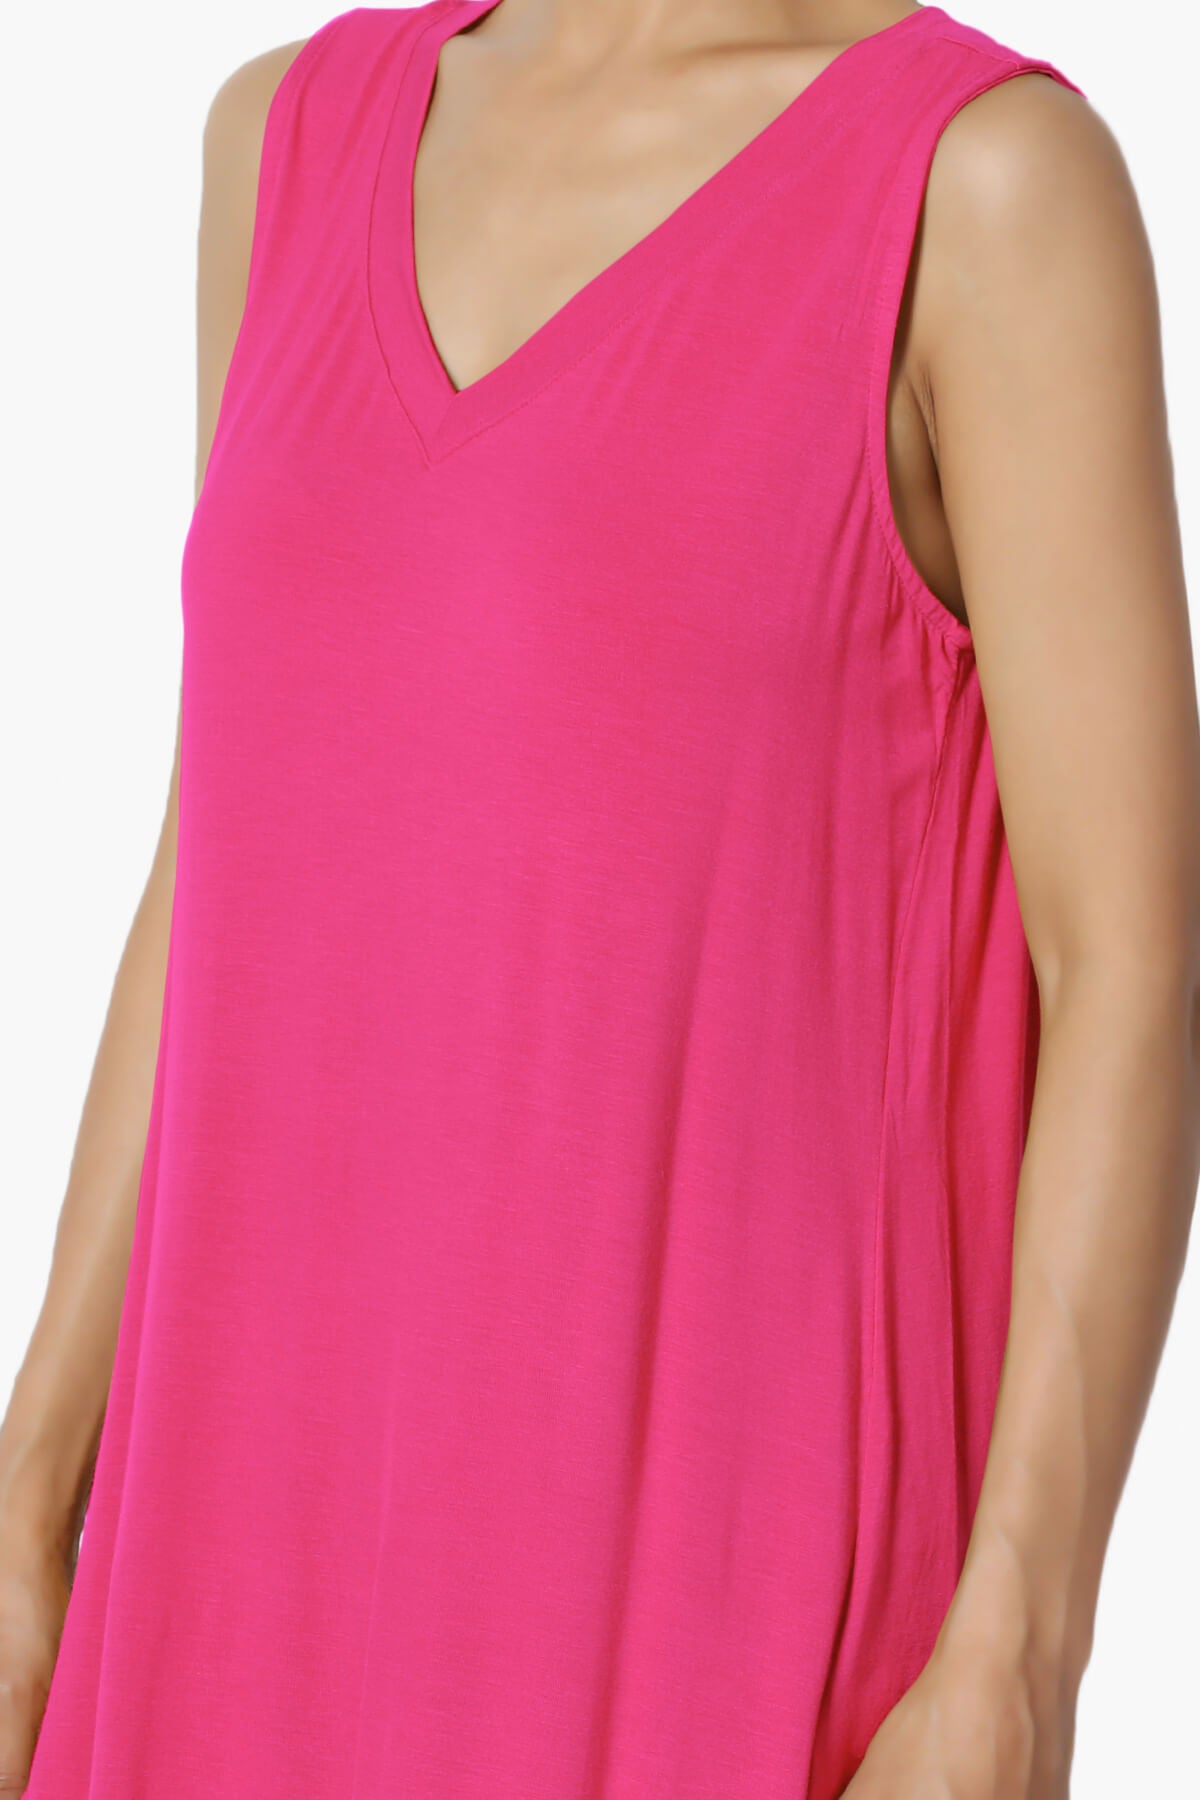 Myles Sleeveless V-Neck Luxe Jersey Top HOT PINK_5